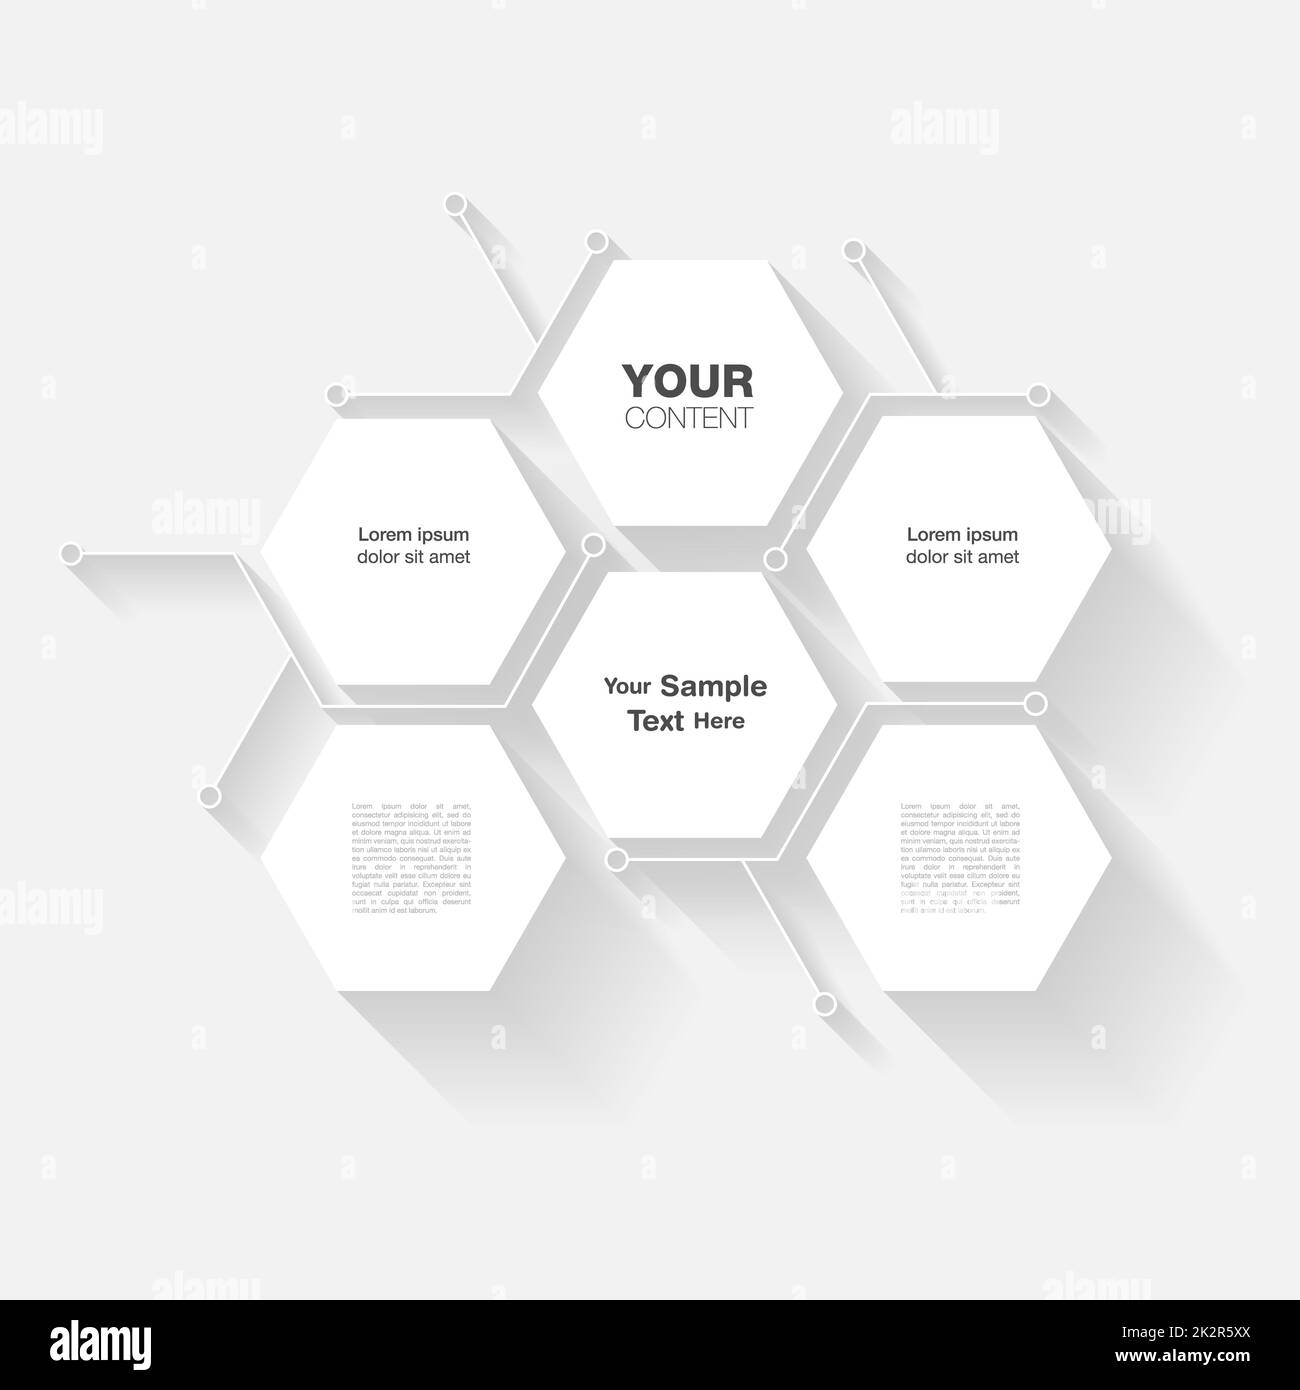 Modern hexagon shape text box design with your content. Stock Photo